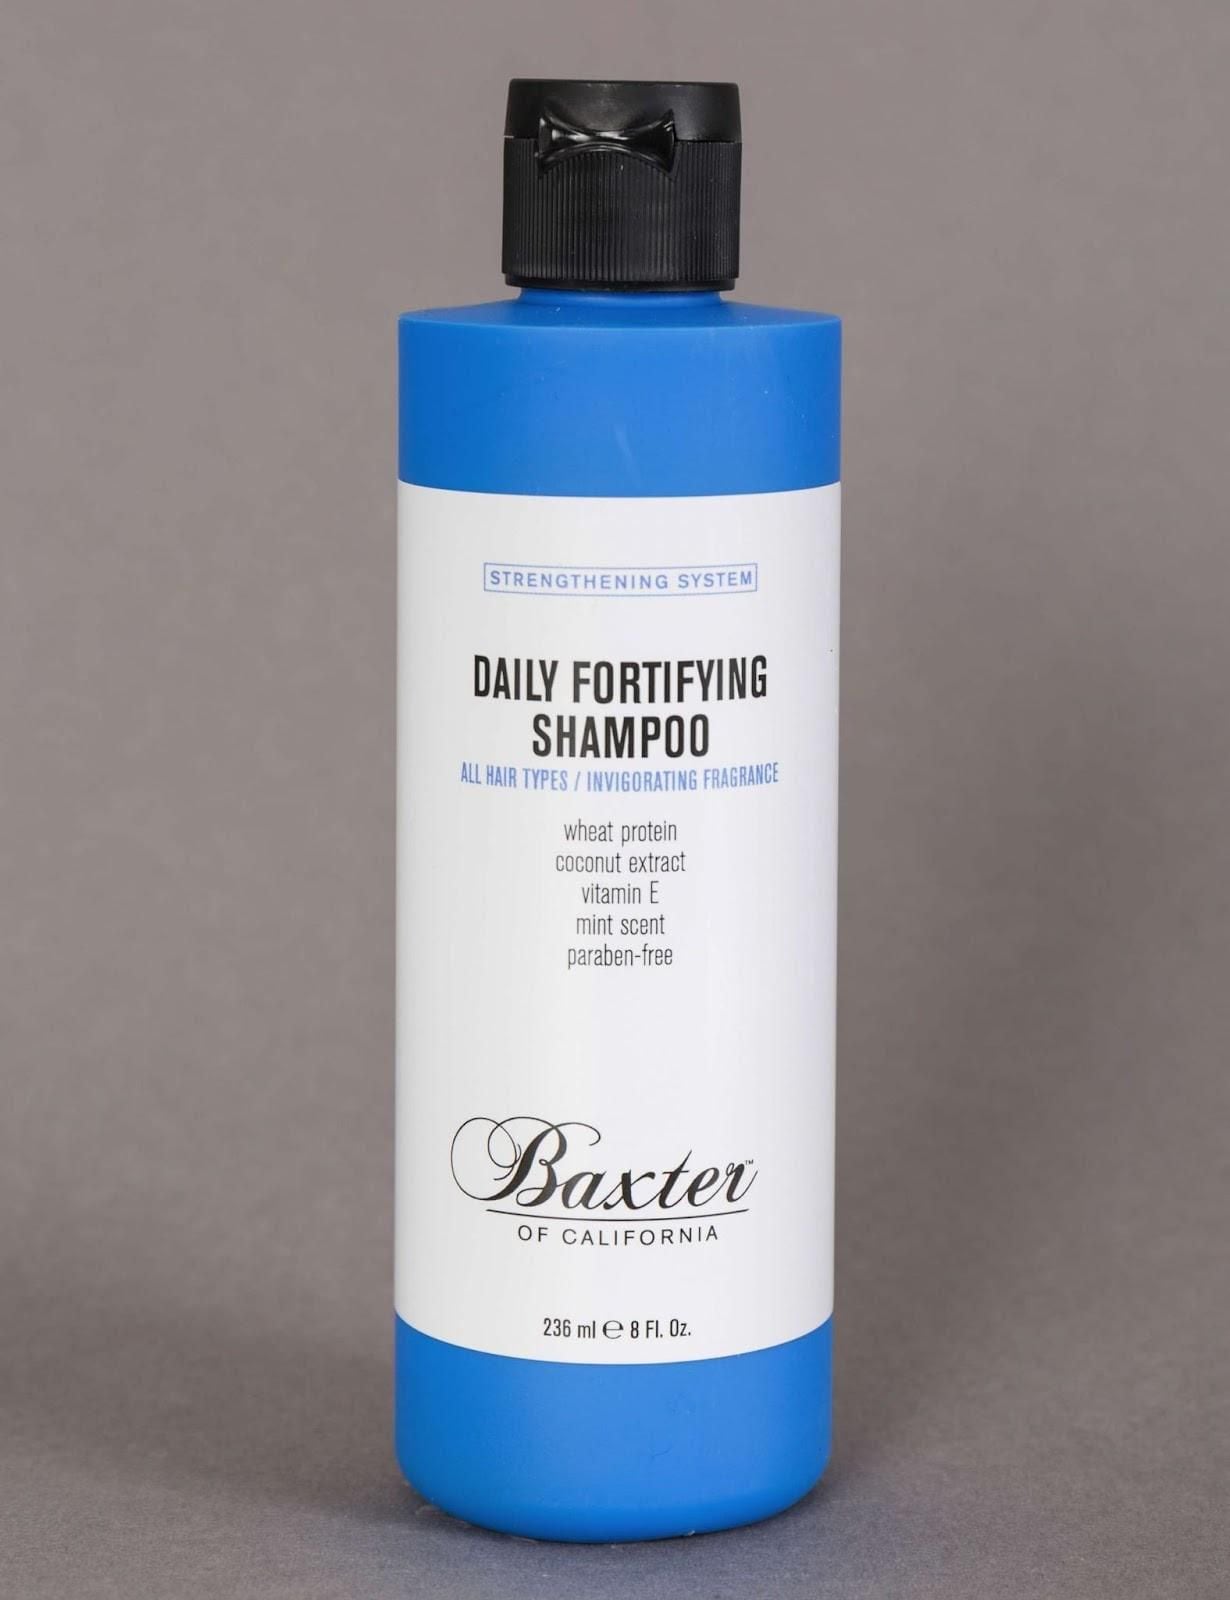 (Baxter of California) | Daily Fortifying Shampoo.